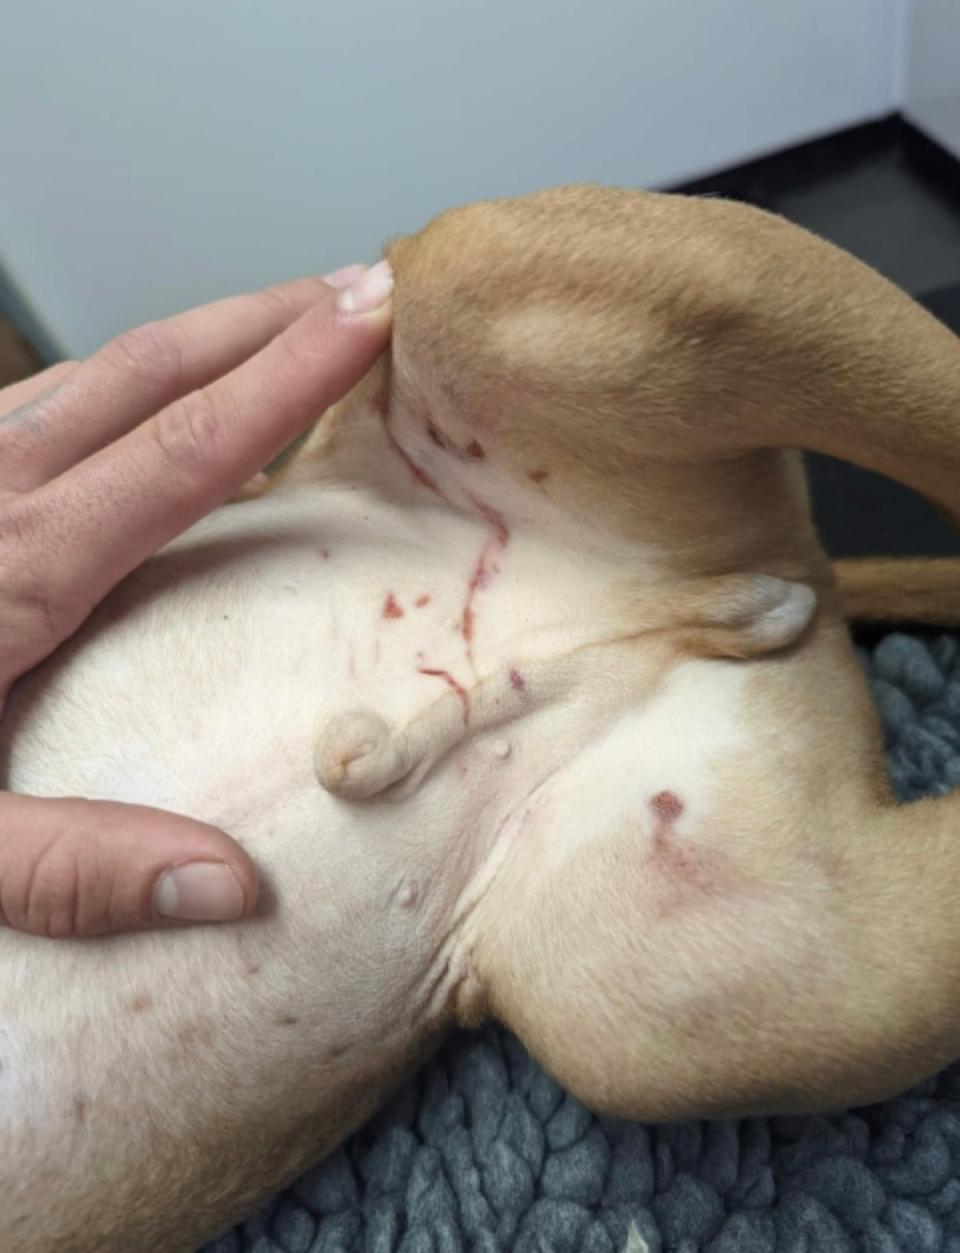 American bully pup Rocko had cigarette burns on his groin and abrasions consistent with being scratched by fingernails (RSPCA / SWNS)